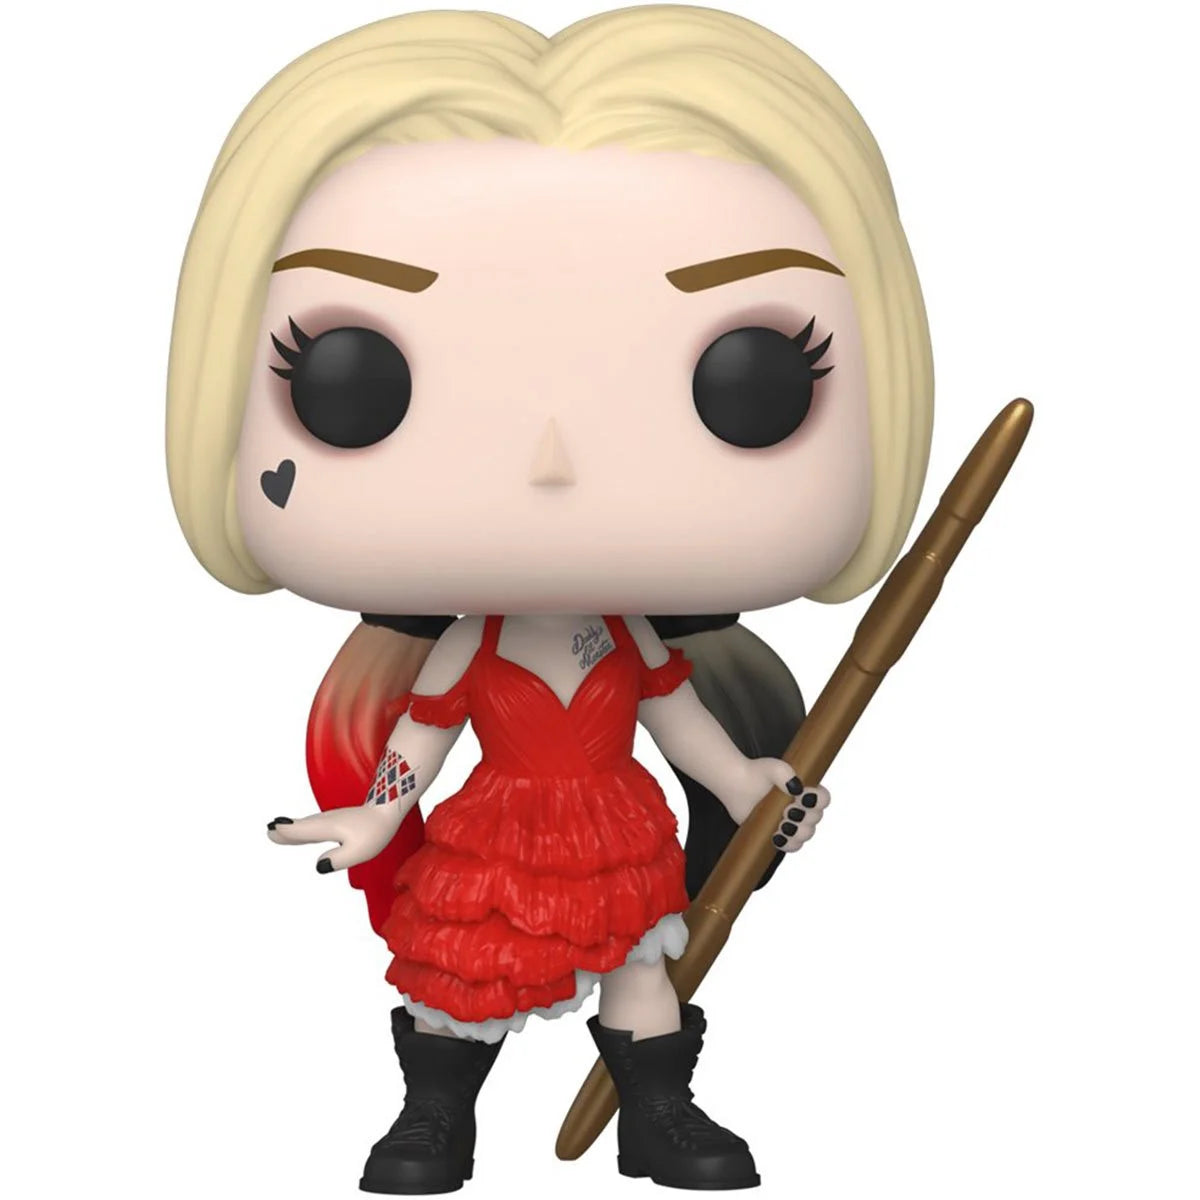 Harley Quinn The Suicide Squad Funko Pop